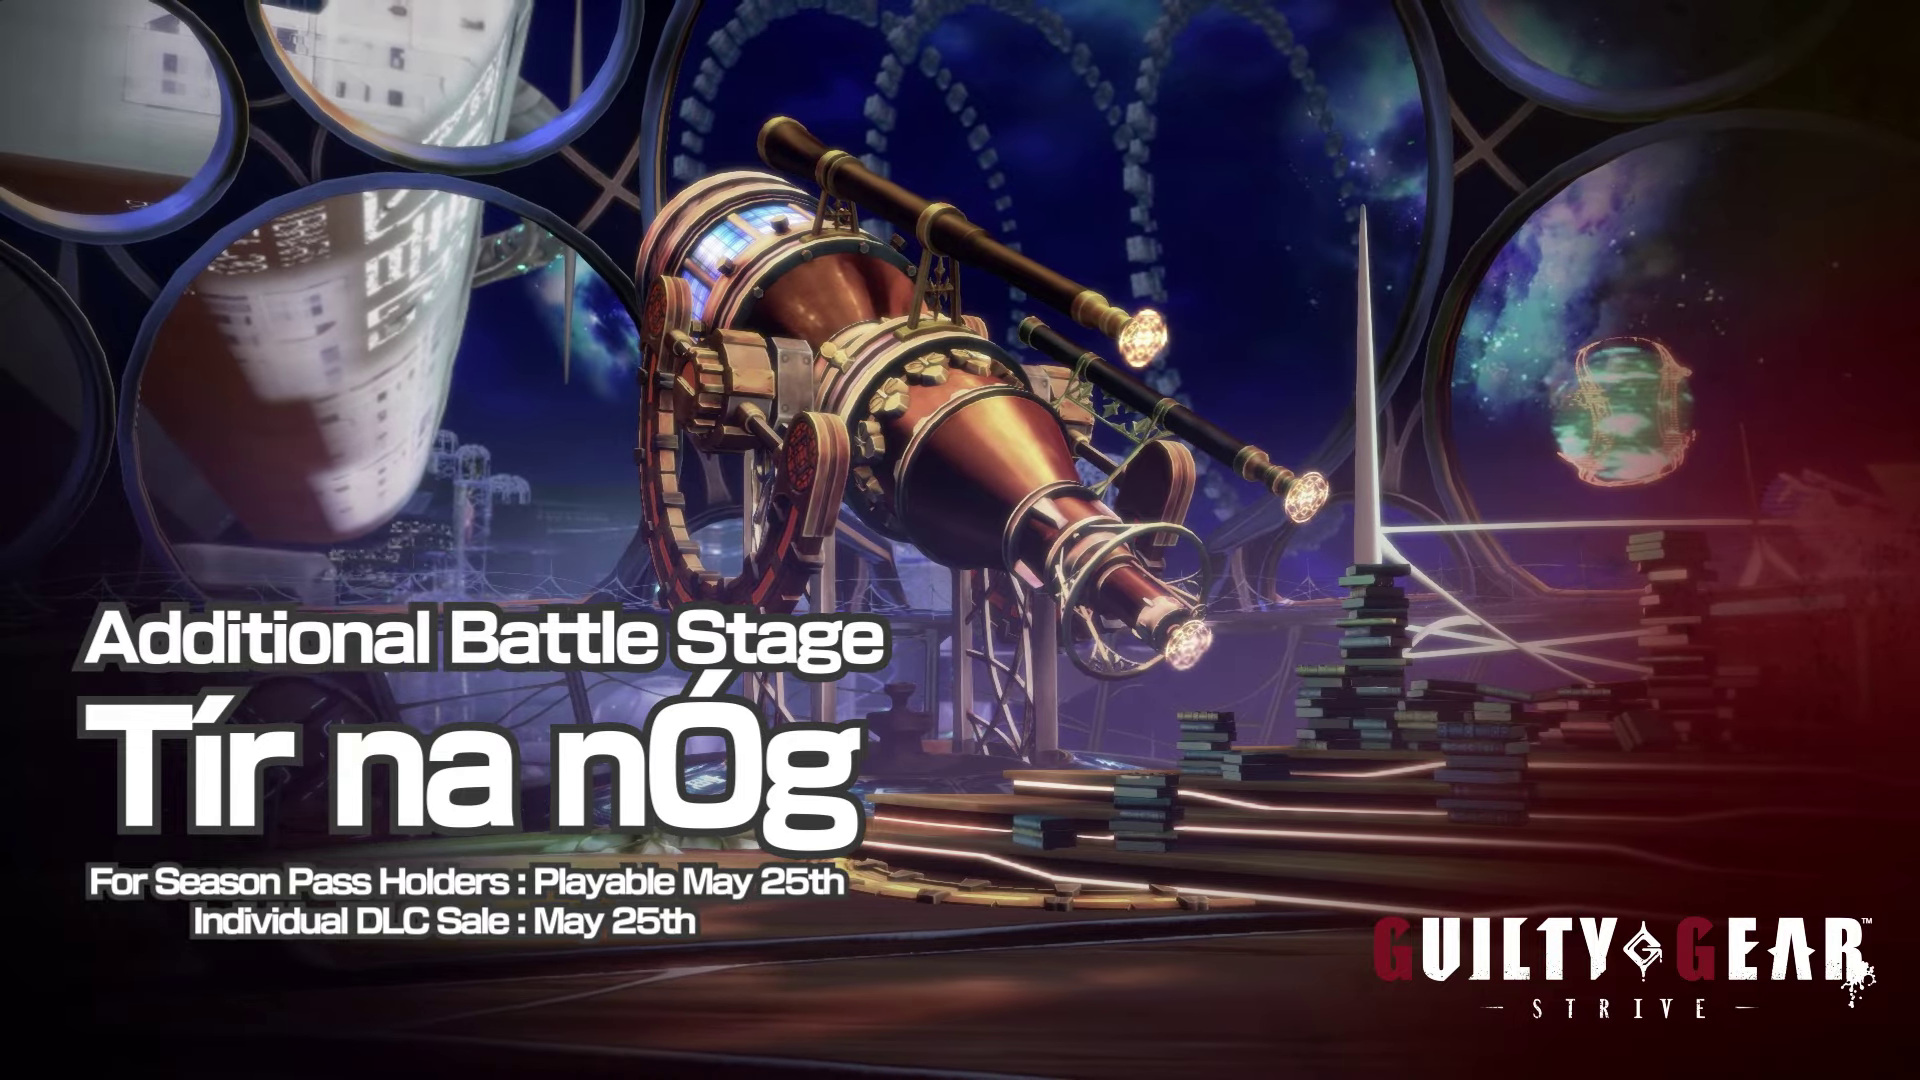 Roger is May's new 9-1 match up : r/Guiltygear